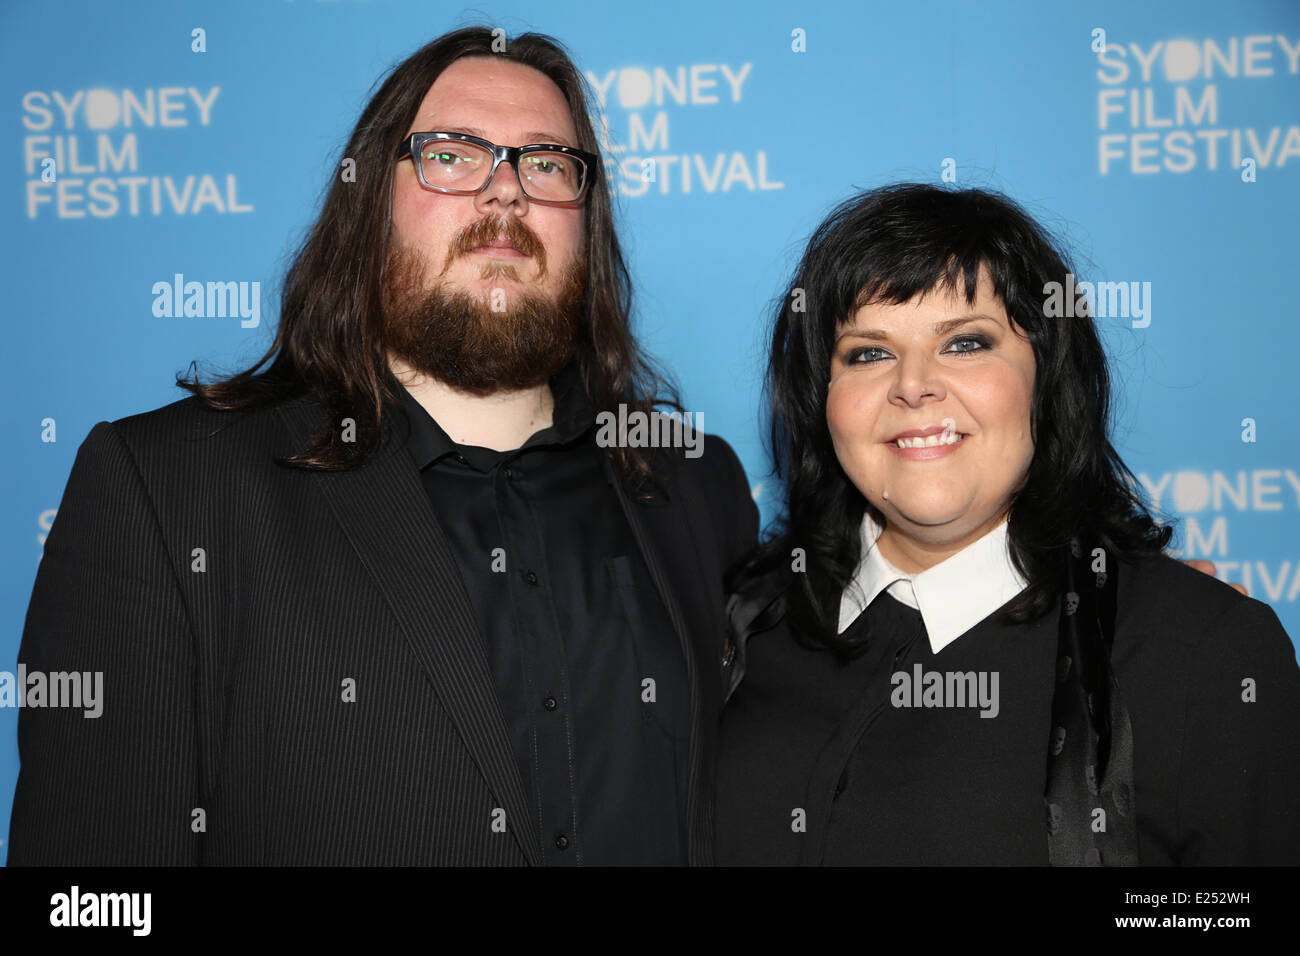 Sydney, Australia. 15th June, 2014. carpet at the State Theatre for the Australian premiere of New Zealand vampire mockumentary ‘What We Do in the Shadows’. Copyright Credit:  2014 Richard Milnes/Alamy Live News Stock Photo